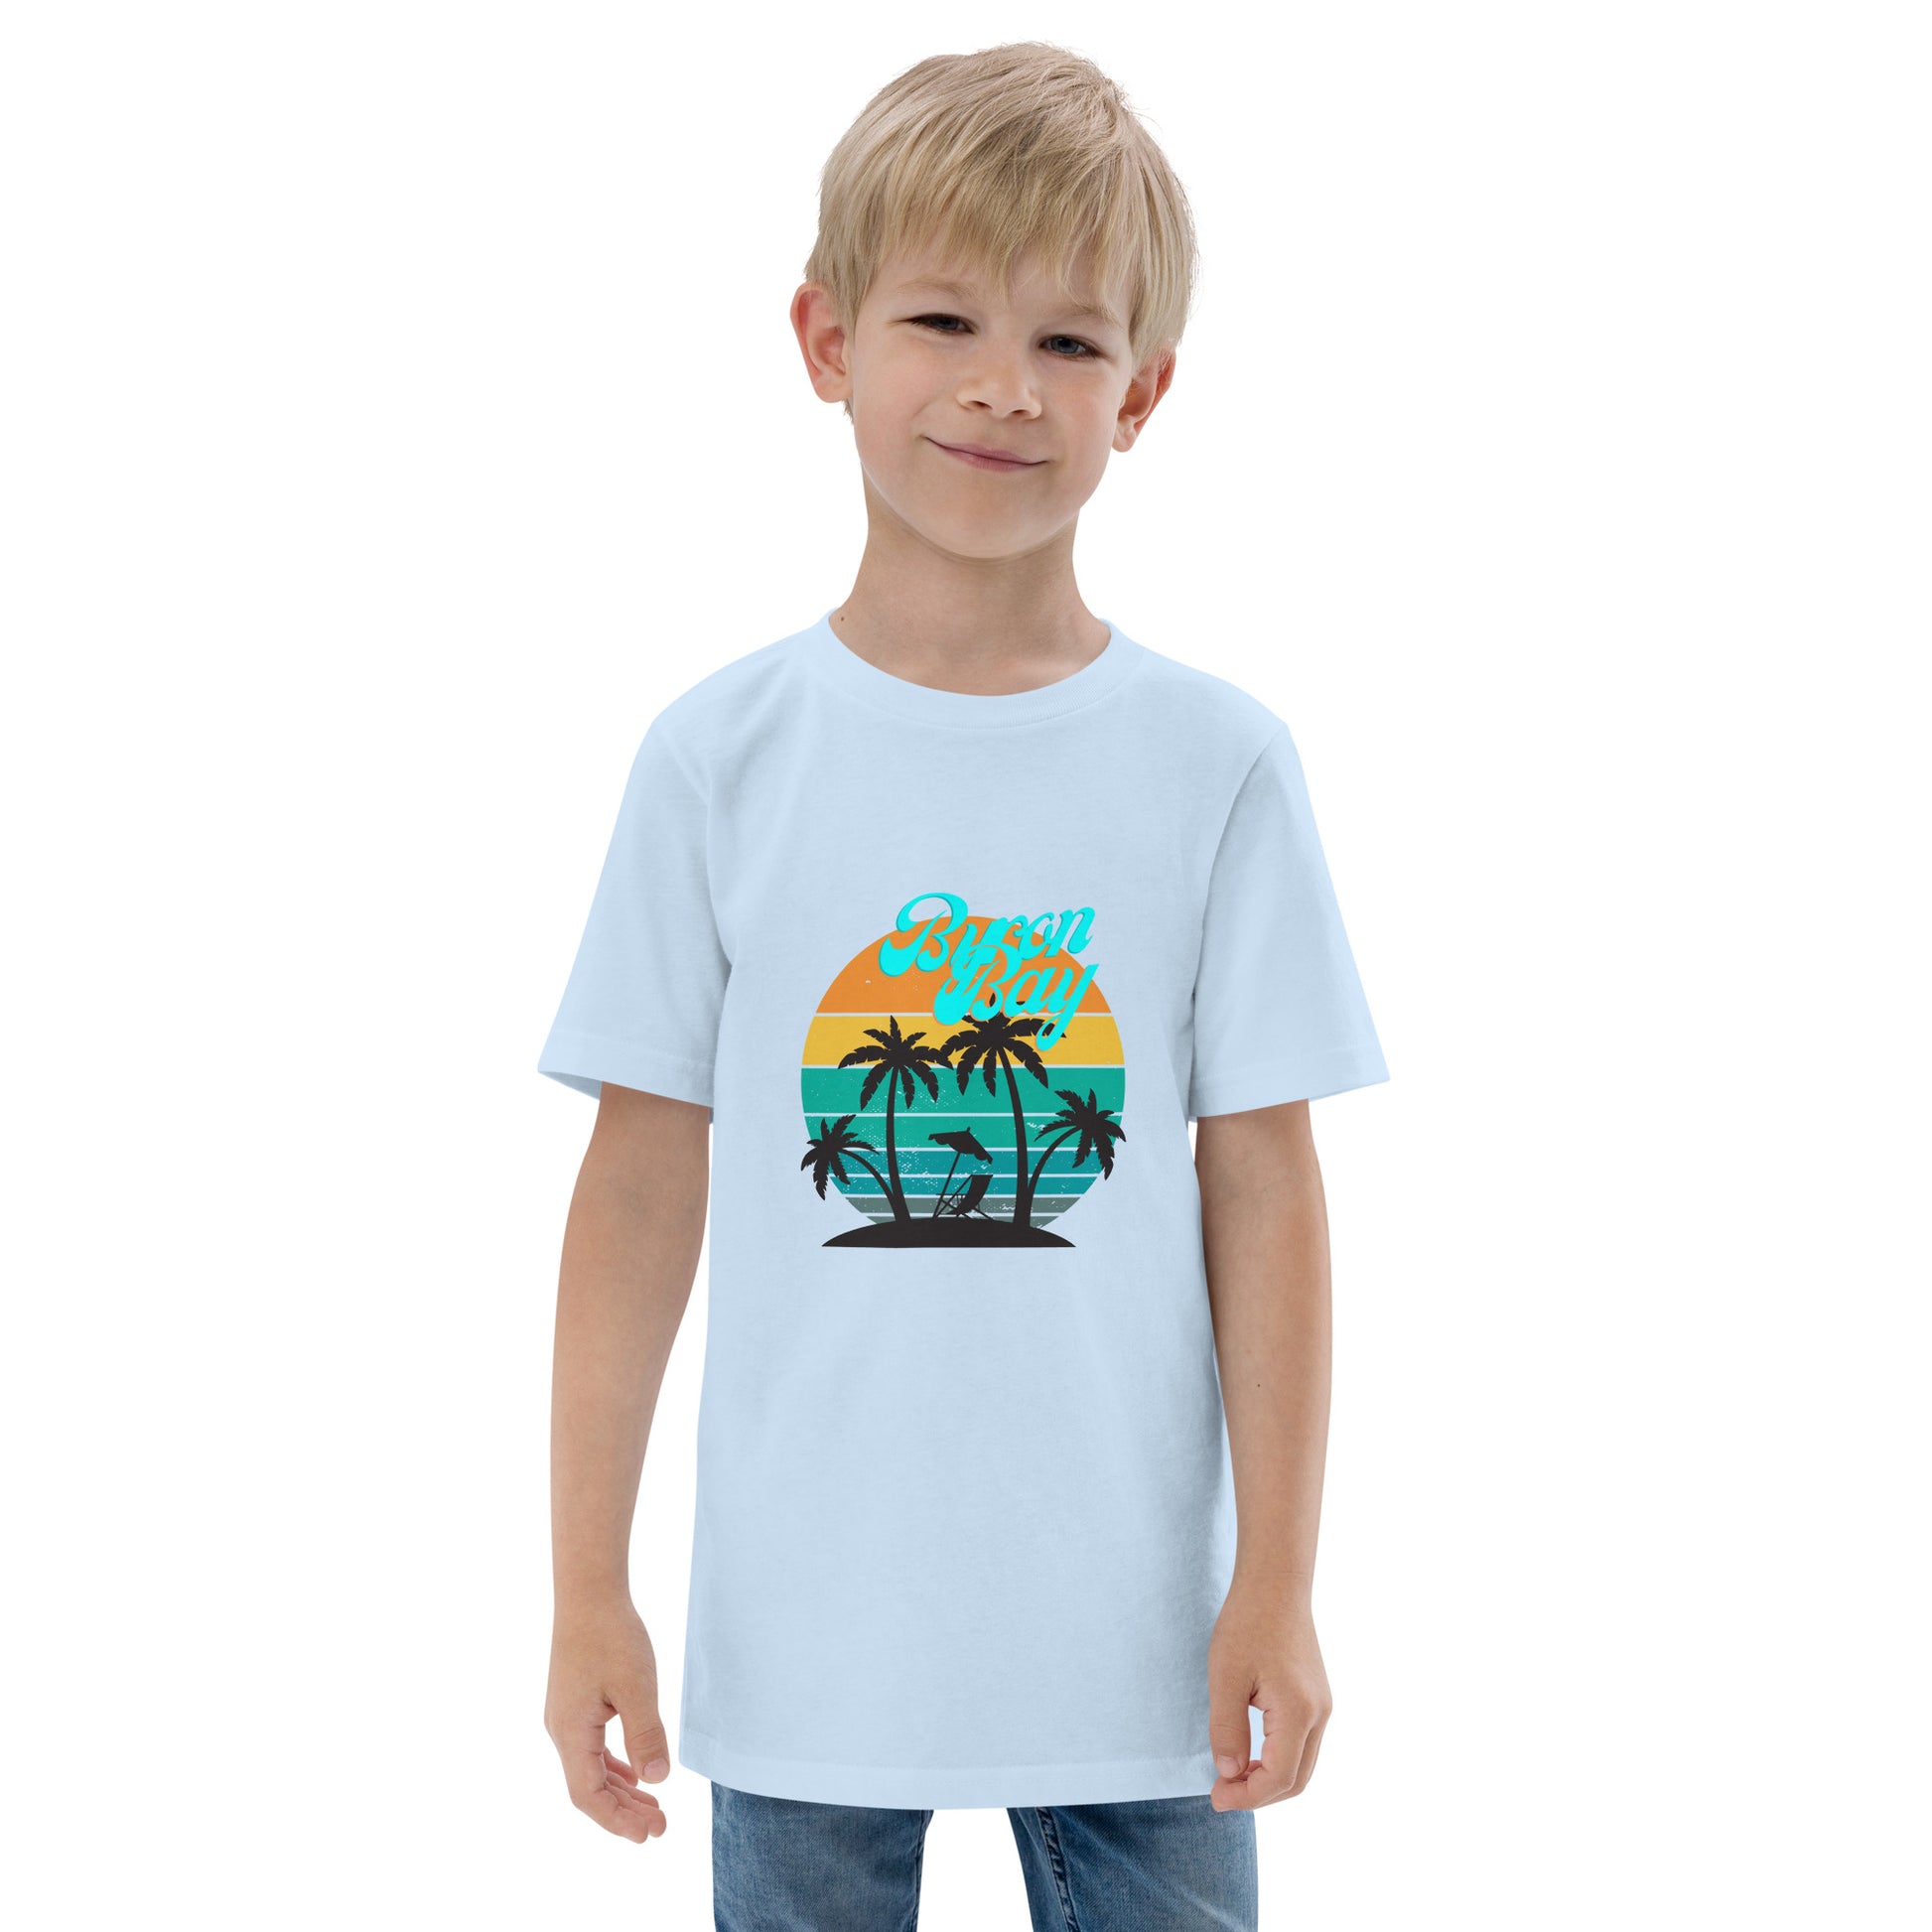  Kids T-Shirt - Light Blue - Front view, being warn on boy standing with his arms by his side - Byron Bay design on front - Genuine Byron Bay Merchandise | Produced by Go Sea Kayak Byron Bay 